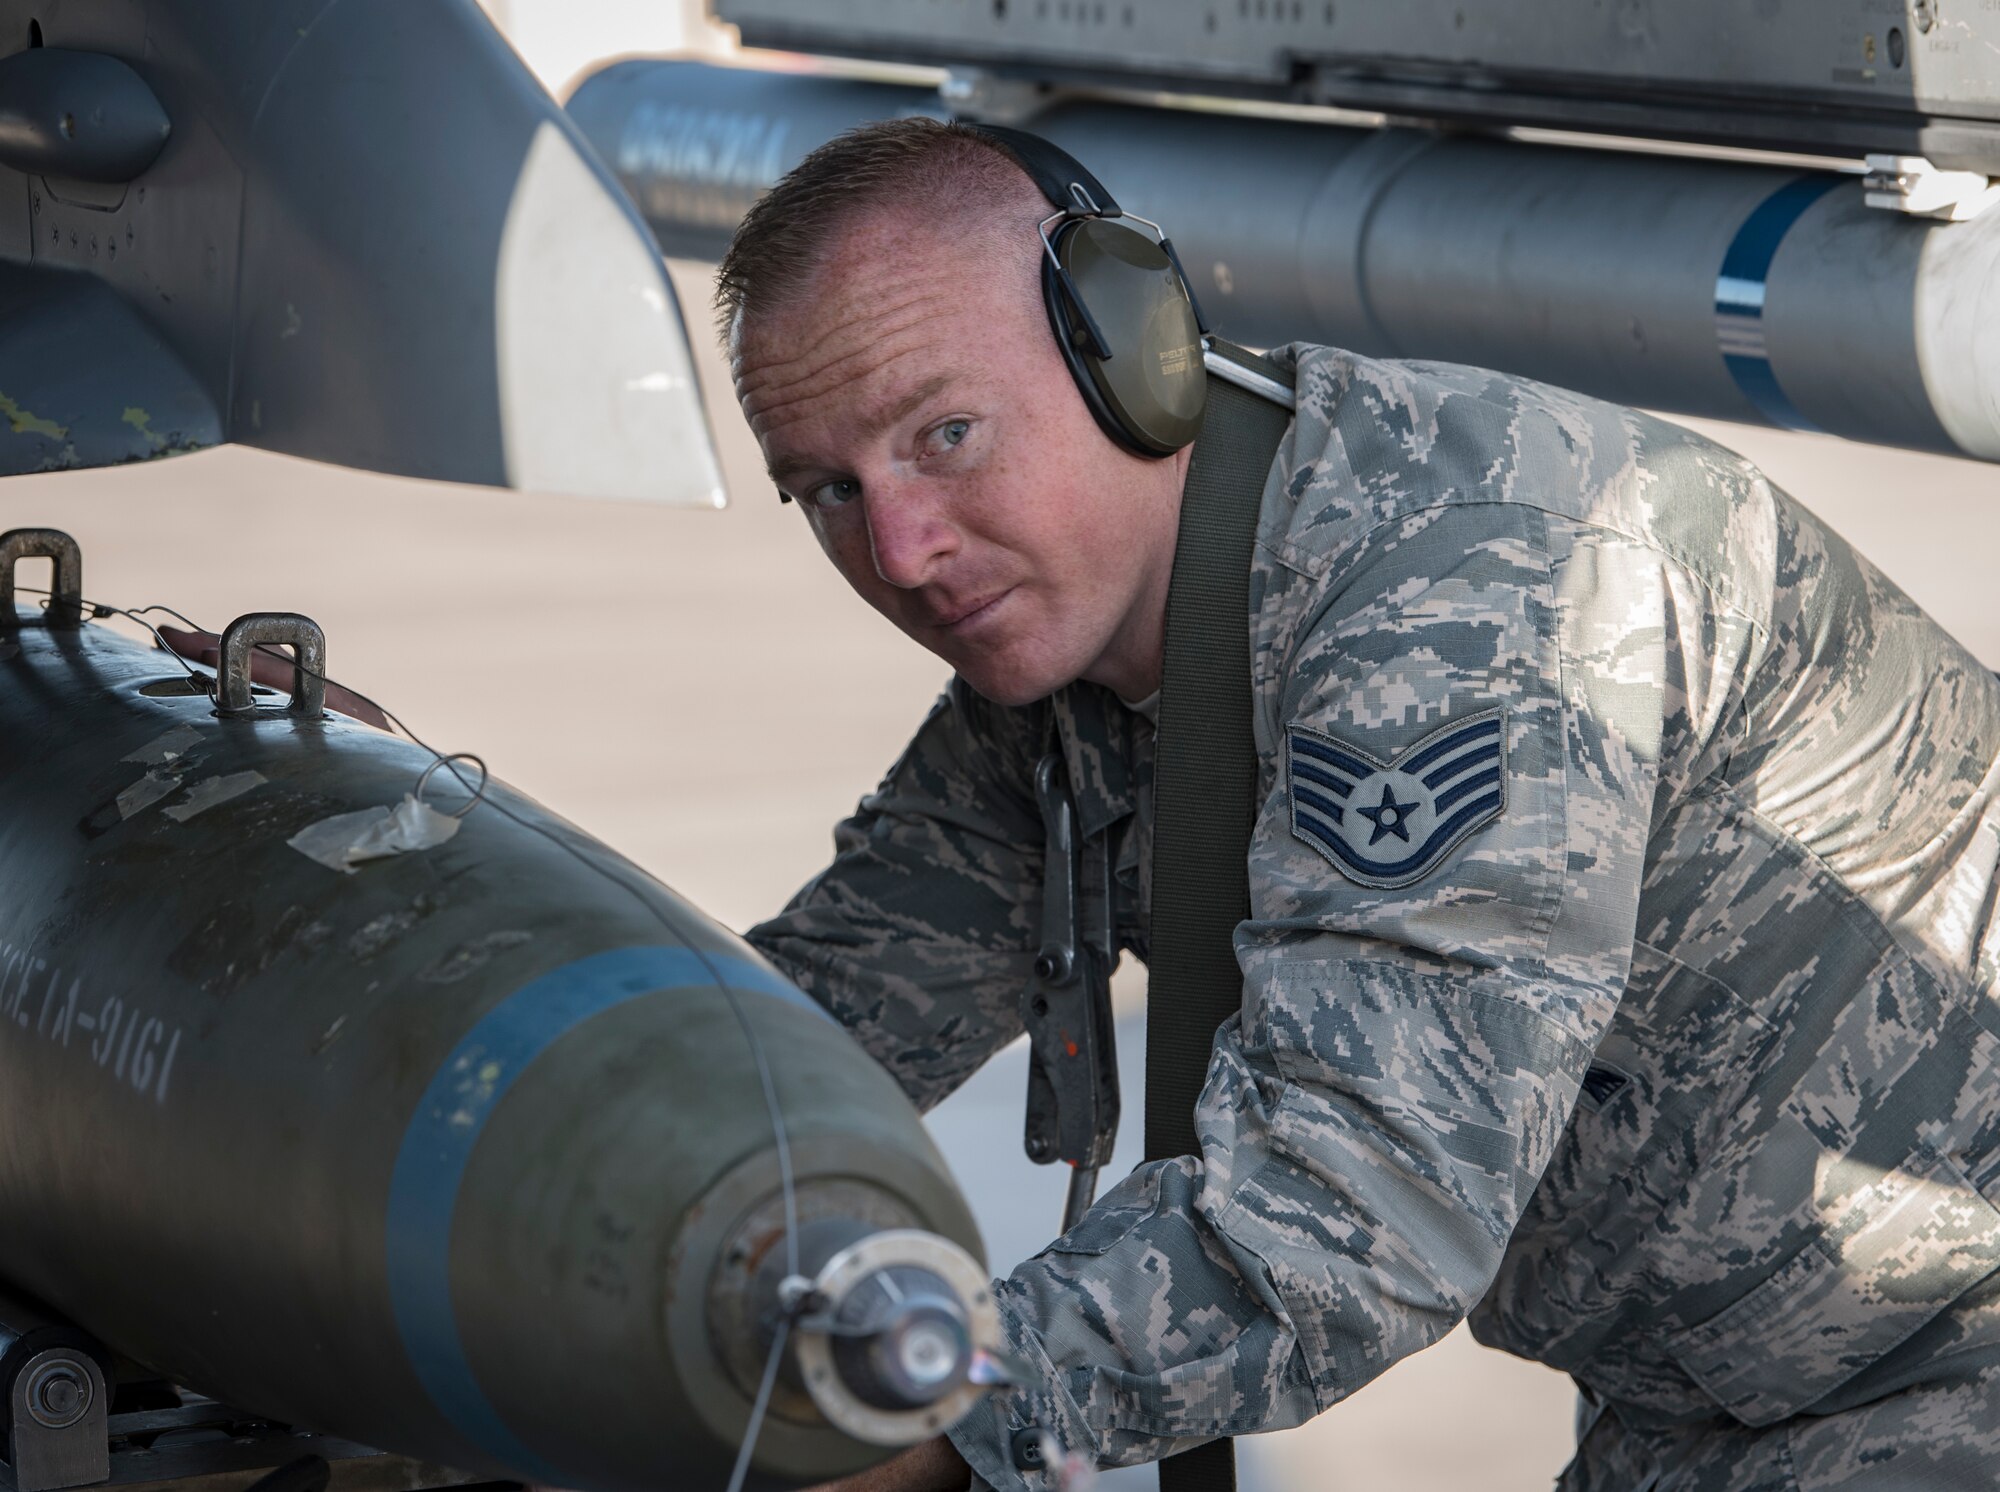 Staff Sgt. Shawn White, 57th Aircraft Maintenance Squadron weapons loader, loads a bomb onto an F-16 Fighting Falcon fighter jet during a load crew competition at Nellis Air Force Base, Nevada, April 13, 2018. The competition challenges the teams' ability to load munitions on aircraft in an accurate, safe and timely manner.(U.S. Air Force photo by Airman 1st Class Andrew D. Sarver)